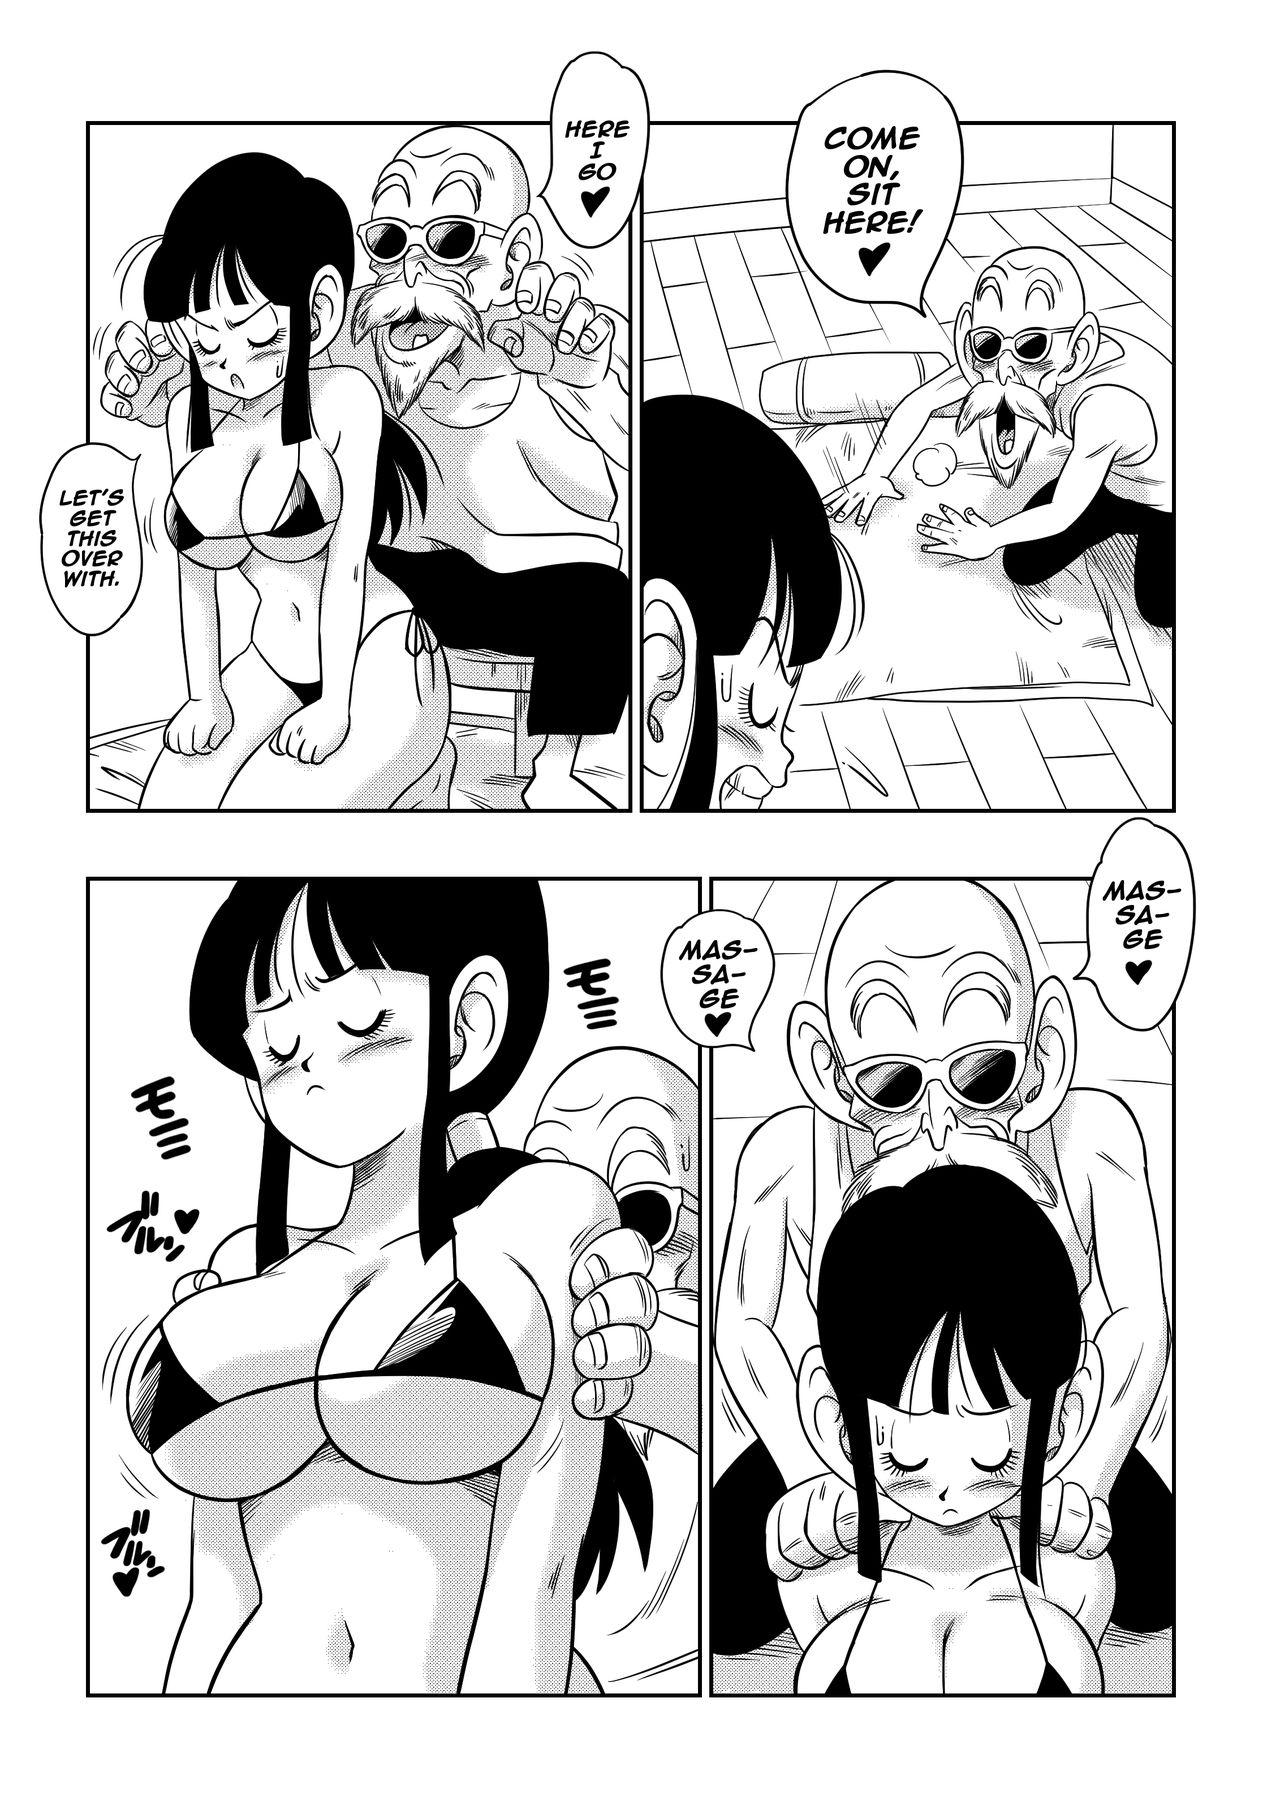 Passivo "An Ancient Tradition" - Young Wife is Harassed! - Dragon ball z Masturbation - Page 8